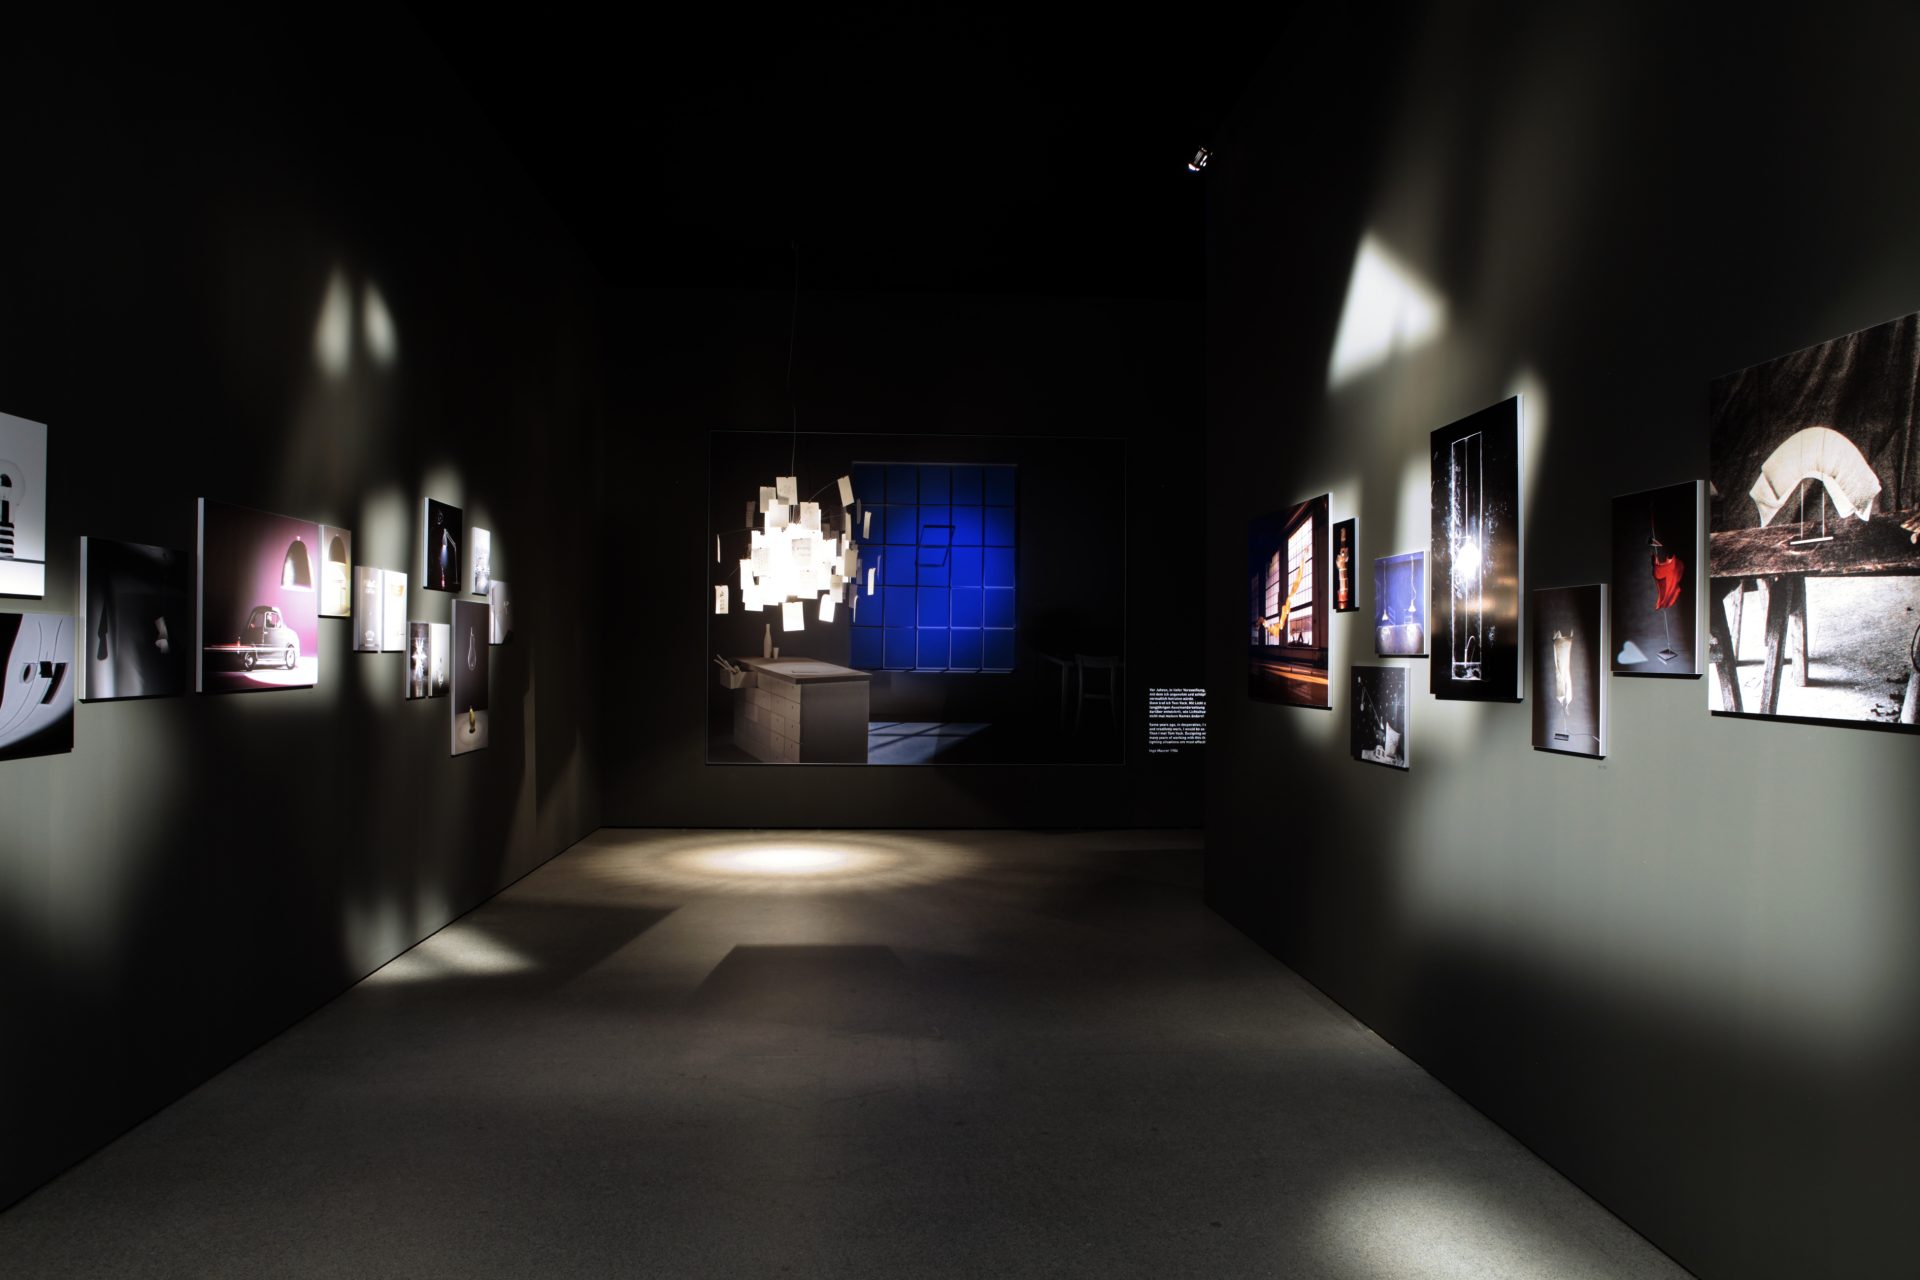 View into a darkened room. At the end of the room hangs a lamp with a warm white light. Next to it seems to be a window with blue panes of glass. High-quality photographs are displayed on the walls. They show other illuminated objects.